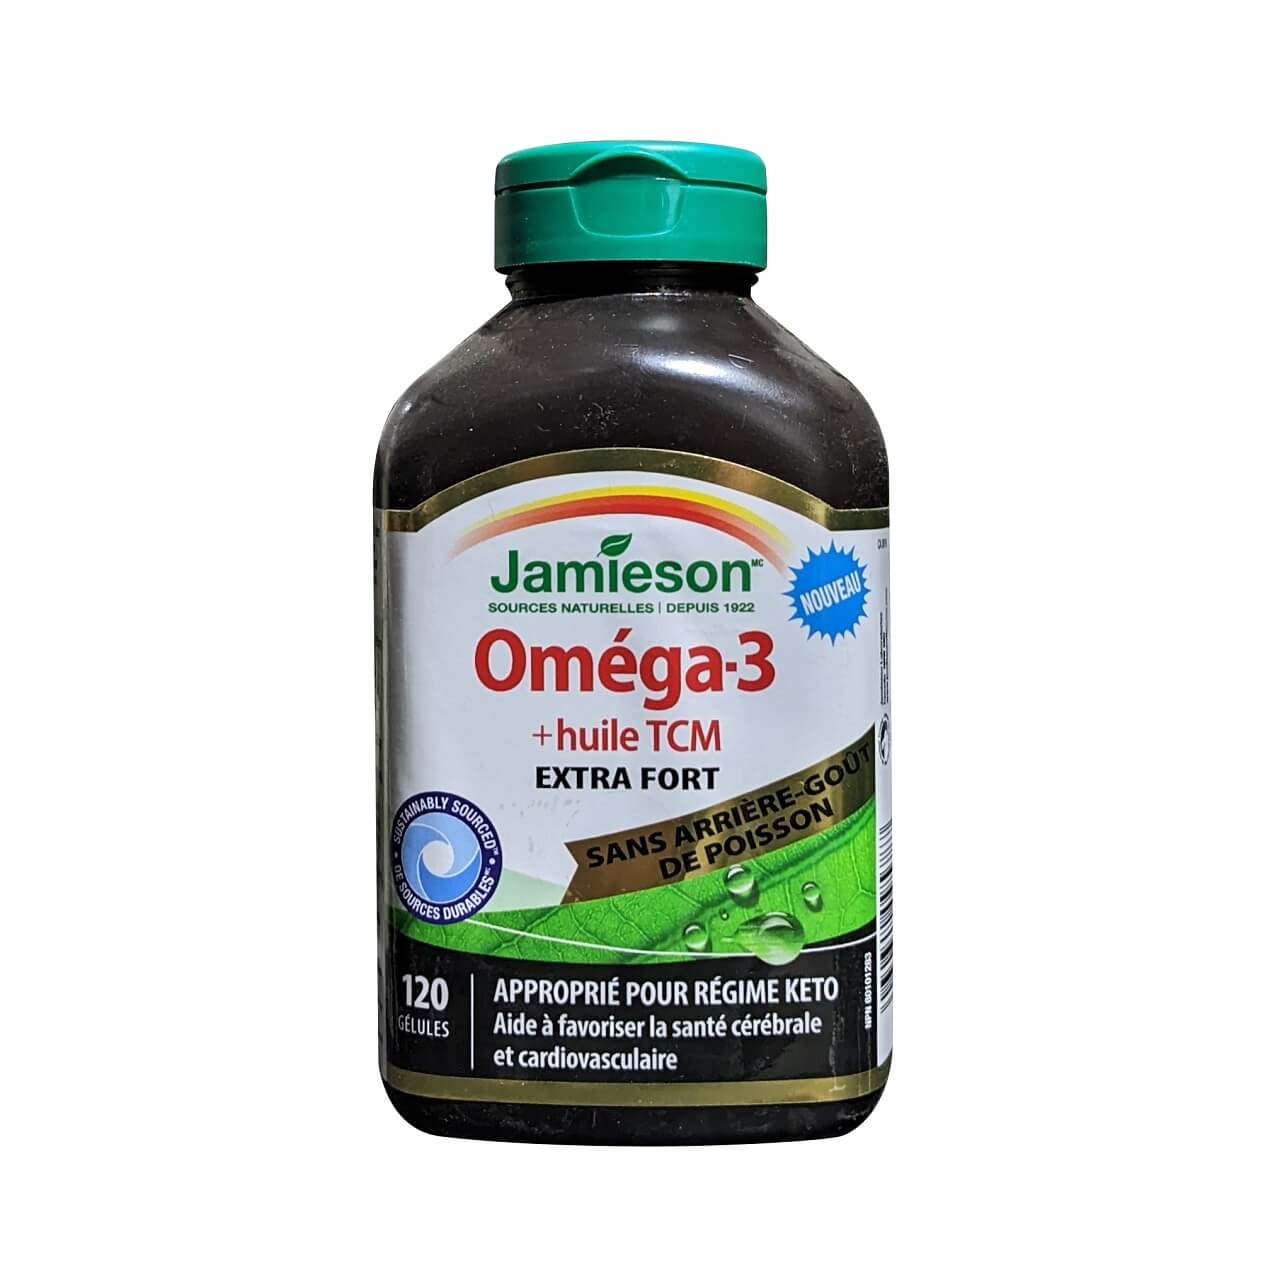 Product label for Jamieson Omega-3 + MCT Oil Extra Strength (120 softgels) in French